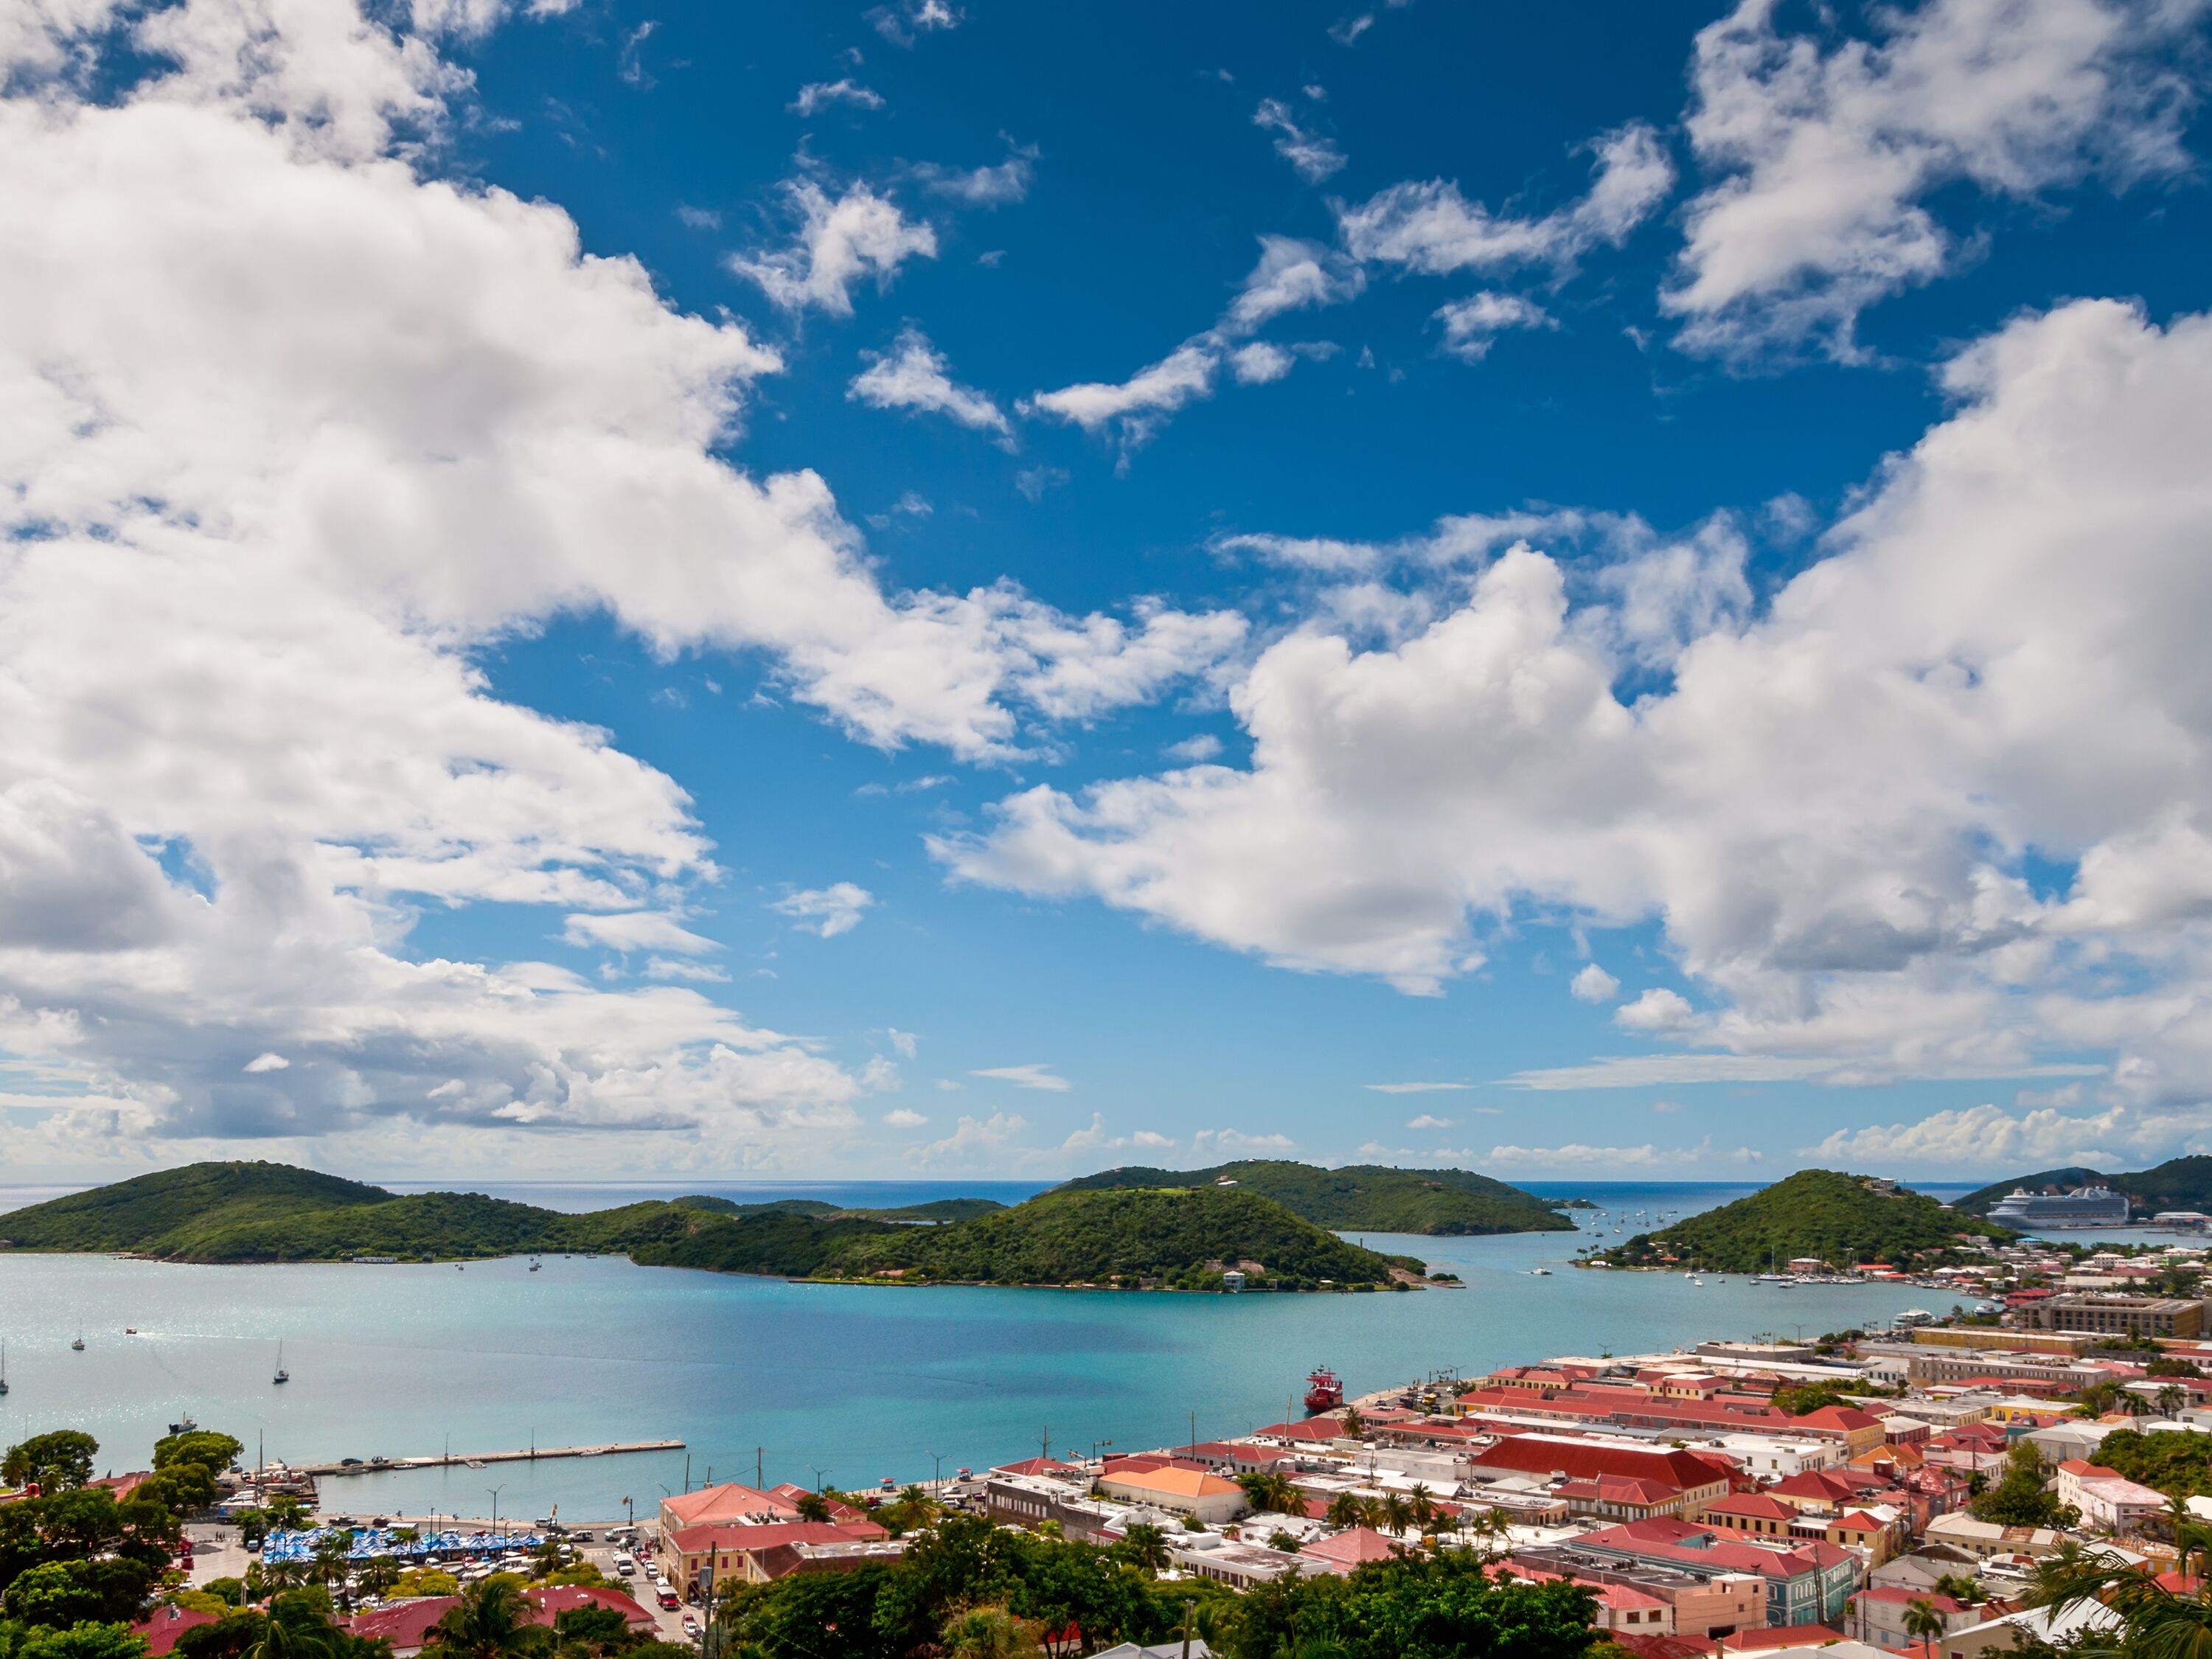 St. Thomas Honeymoon Weather and Travel Guide